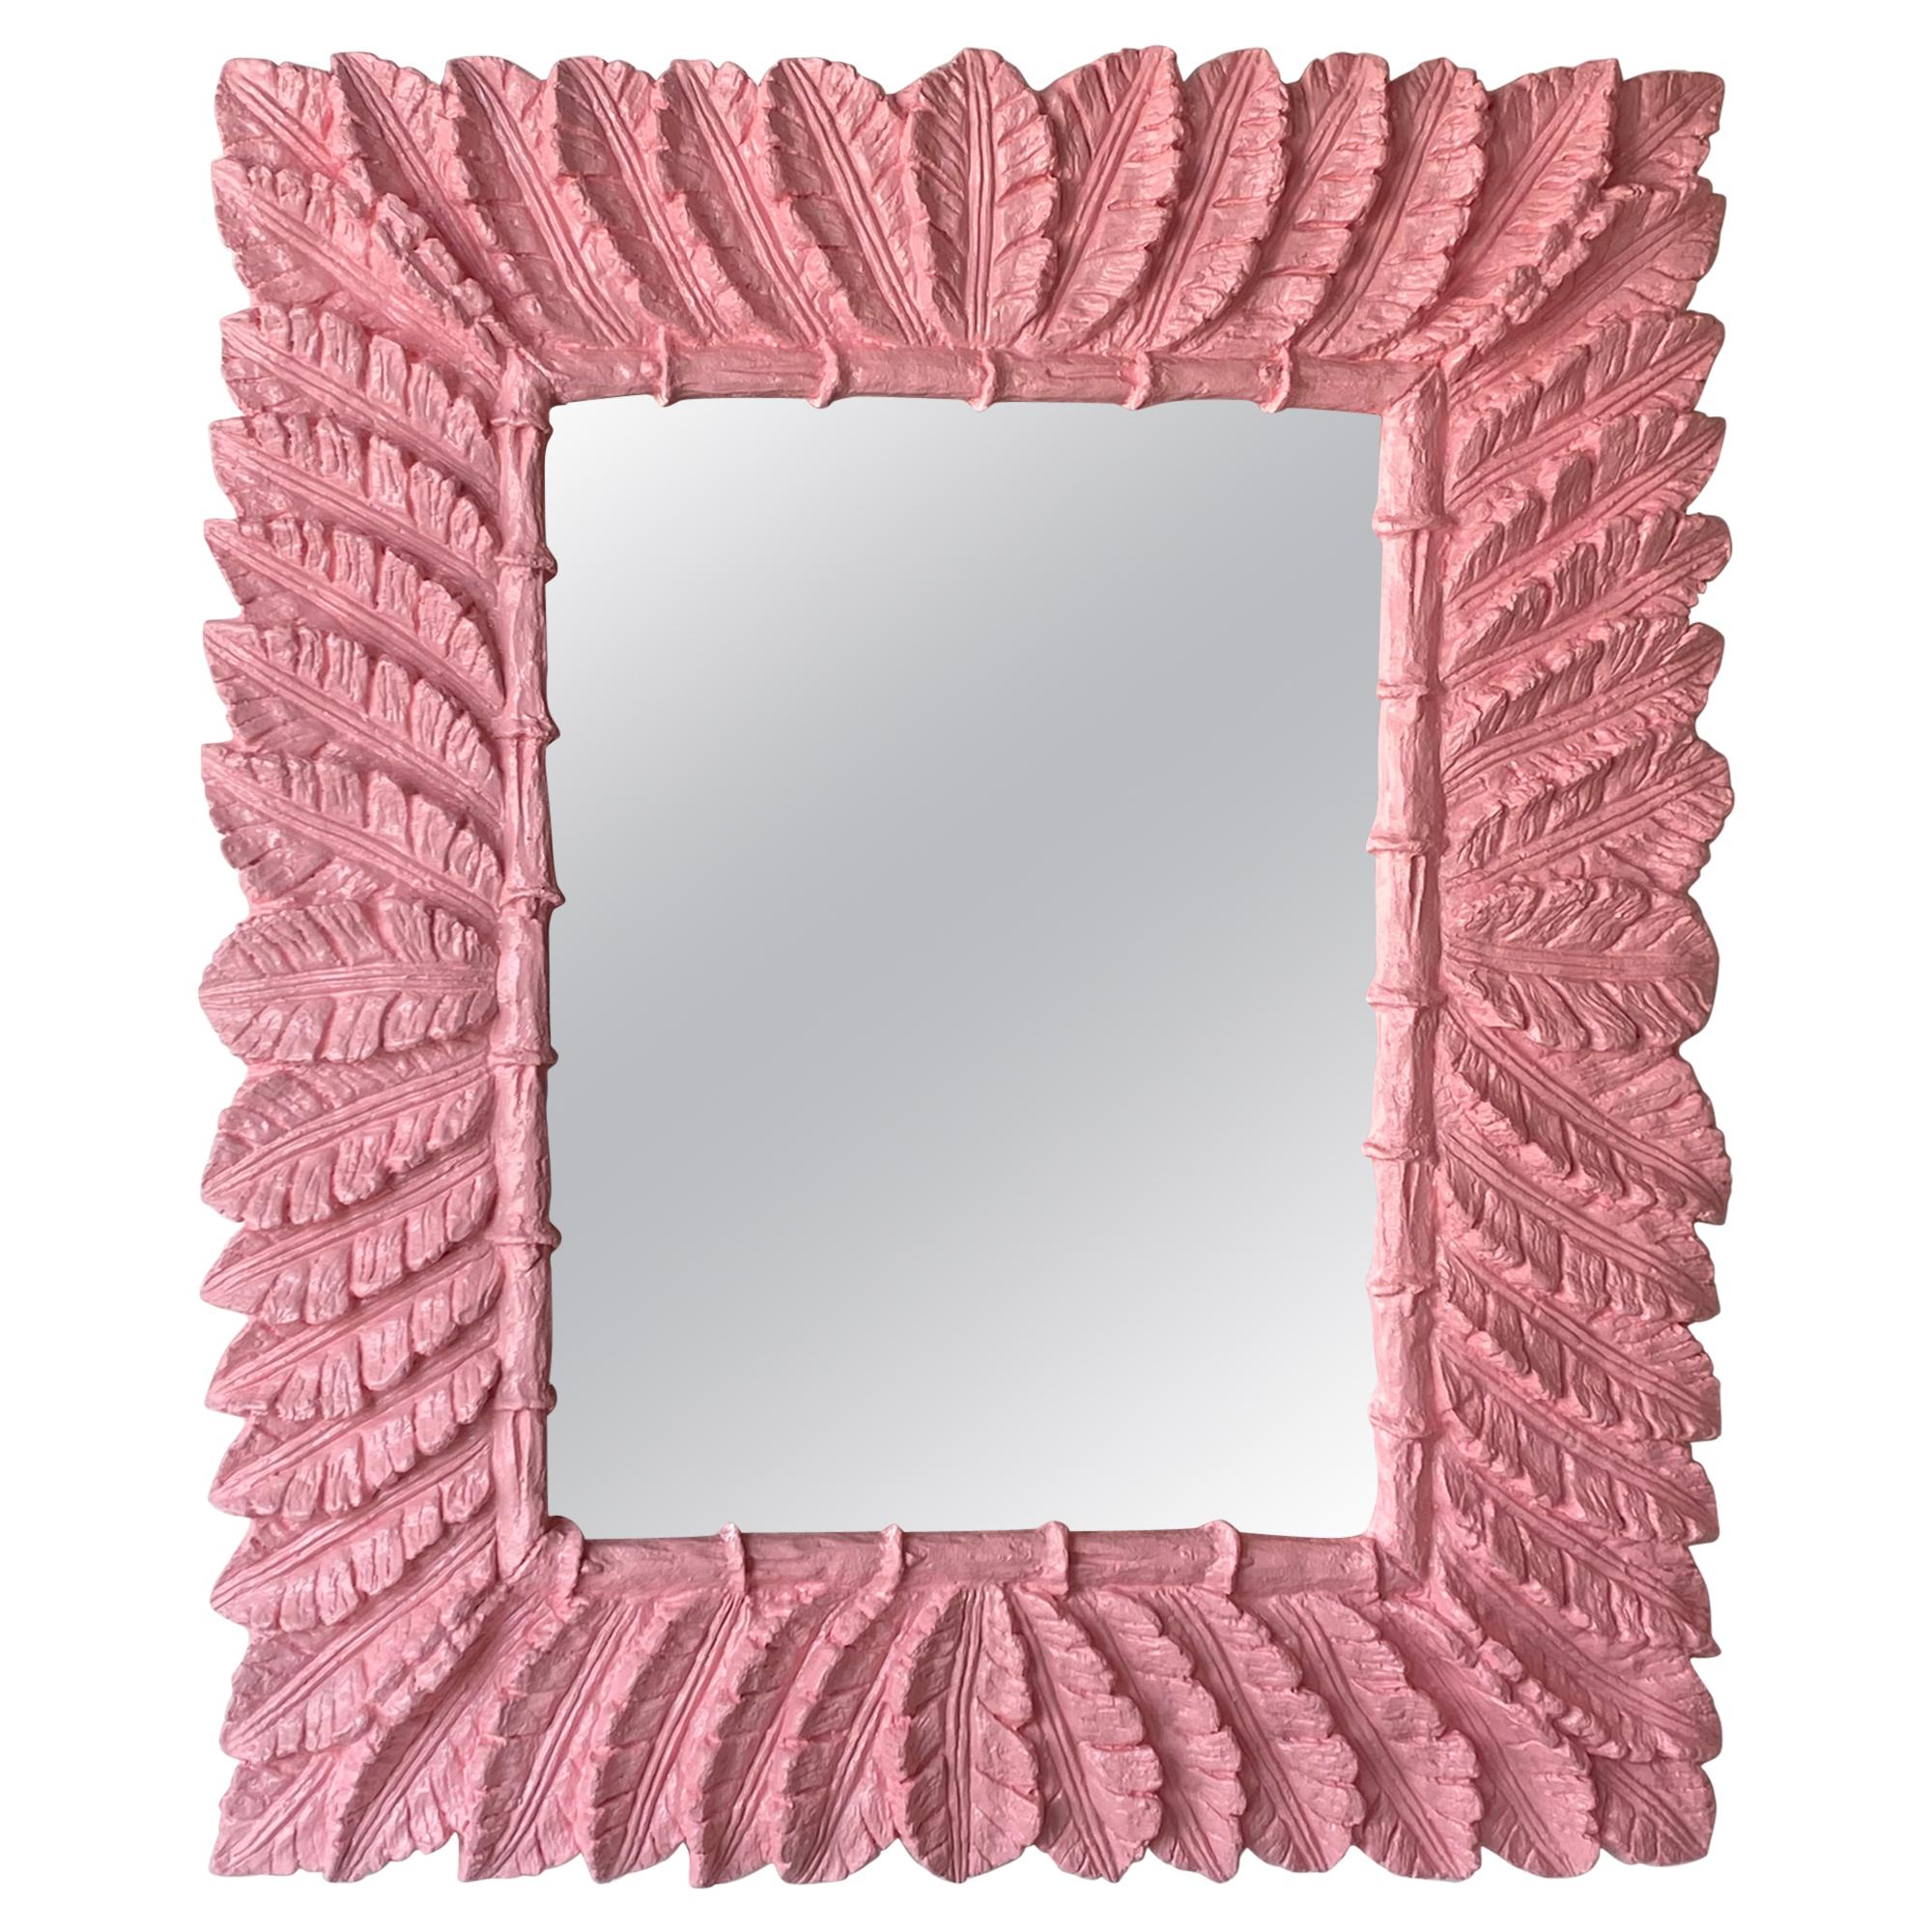 Vintage Palm Beach Coral Pink Lacquered Palm Leaf Large Wall Mirror